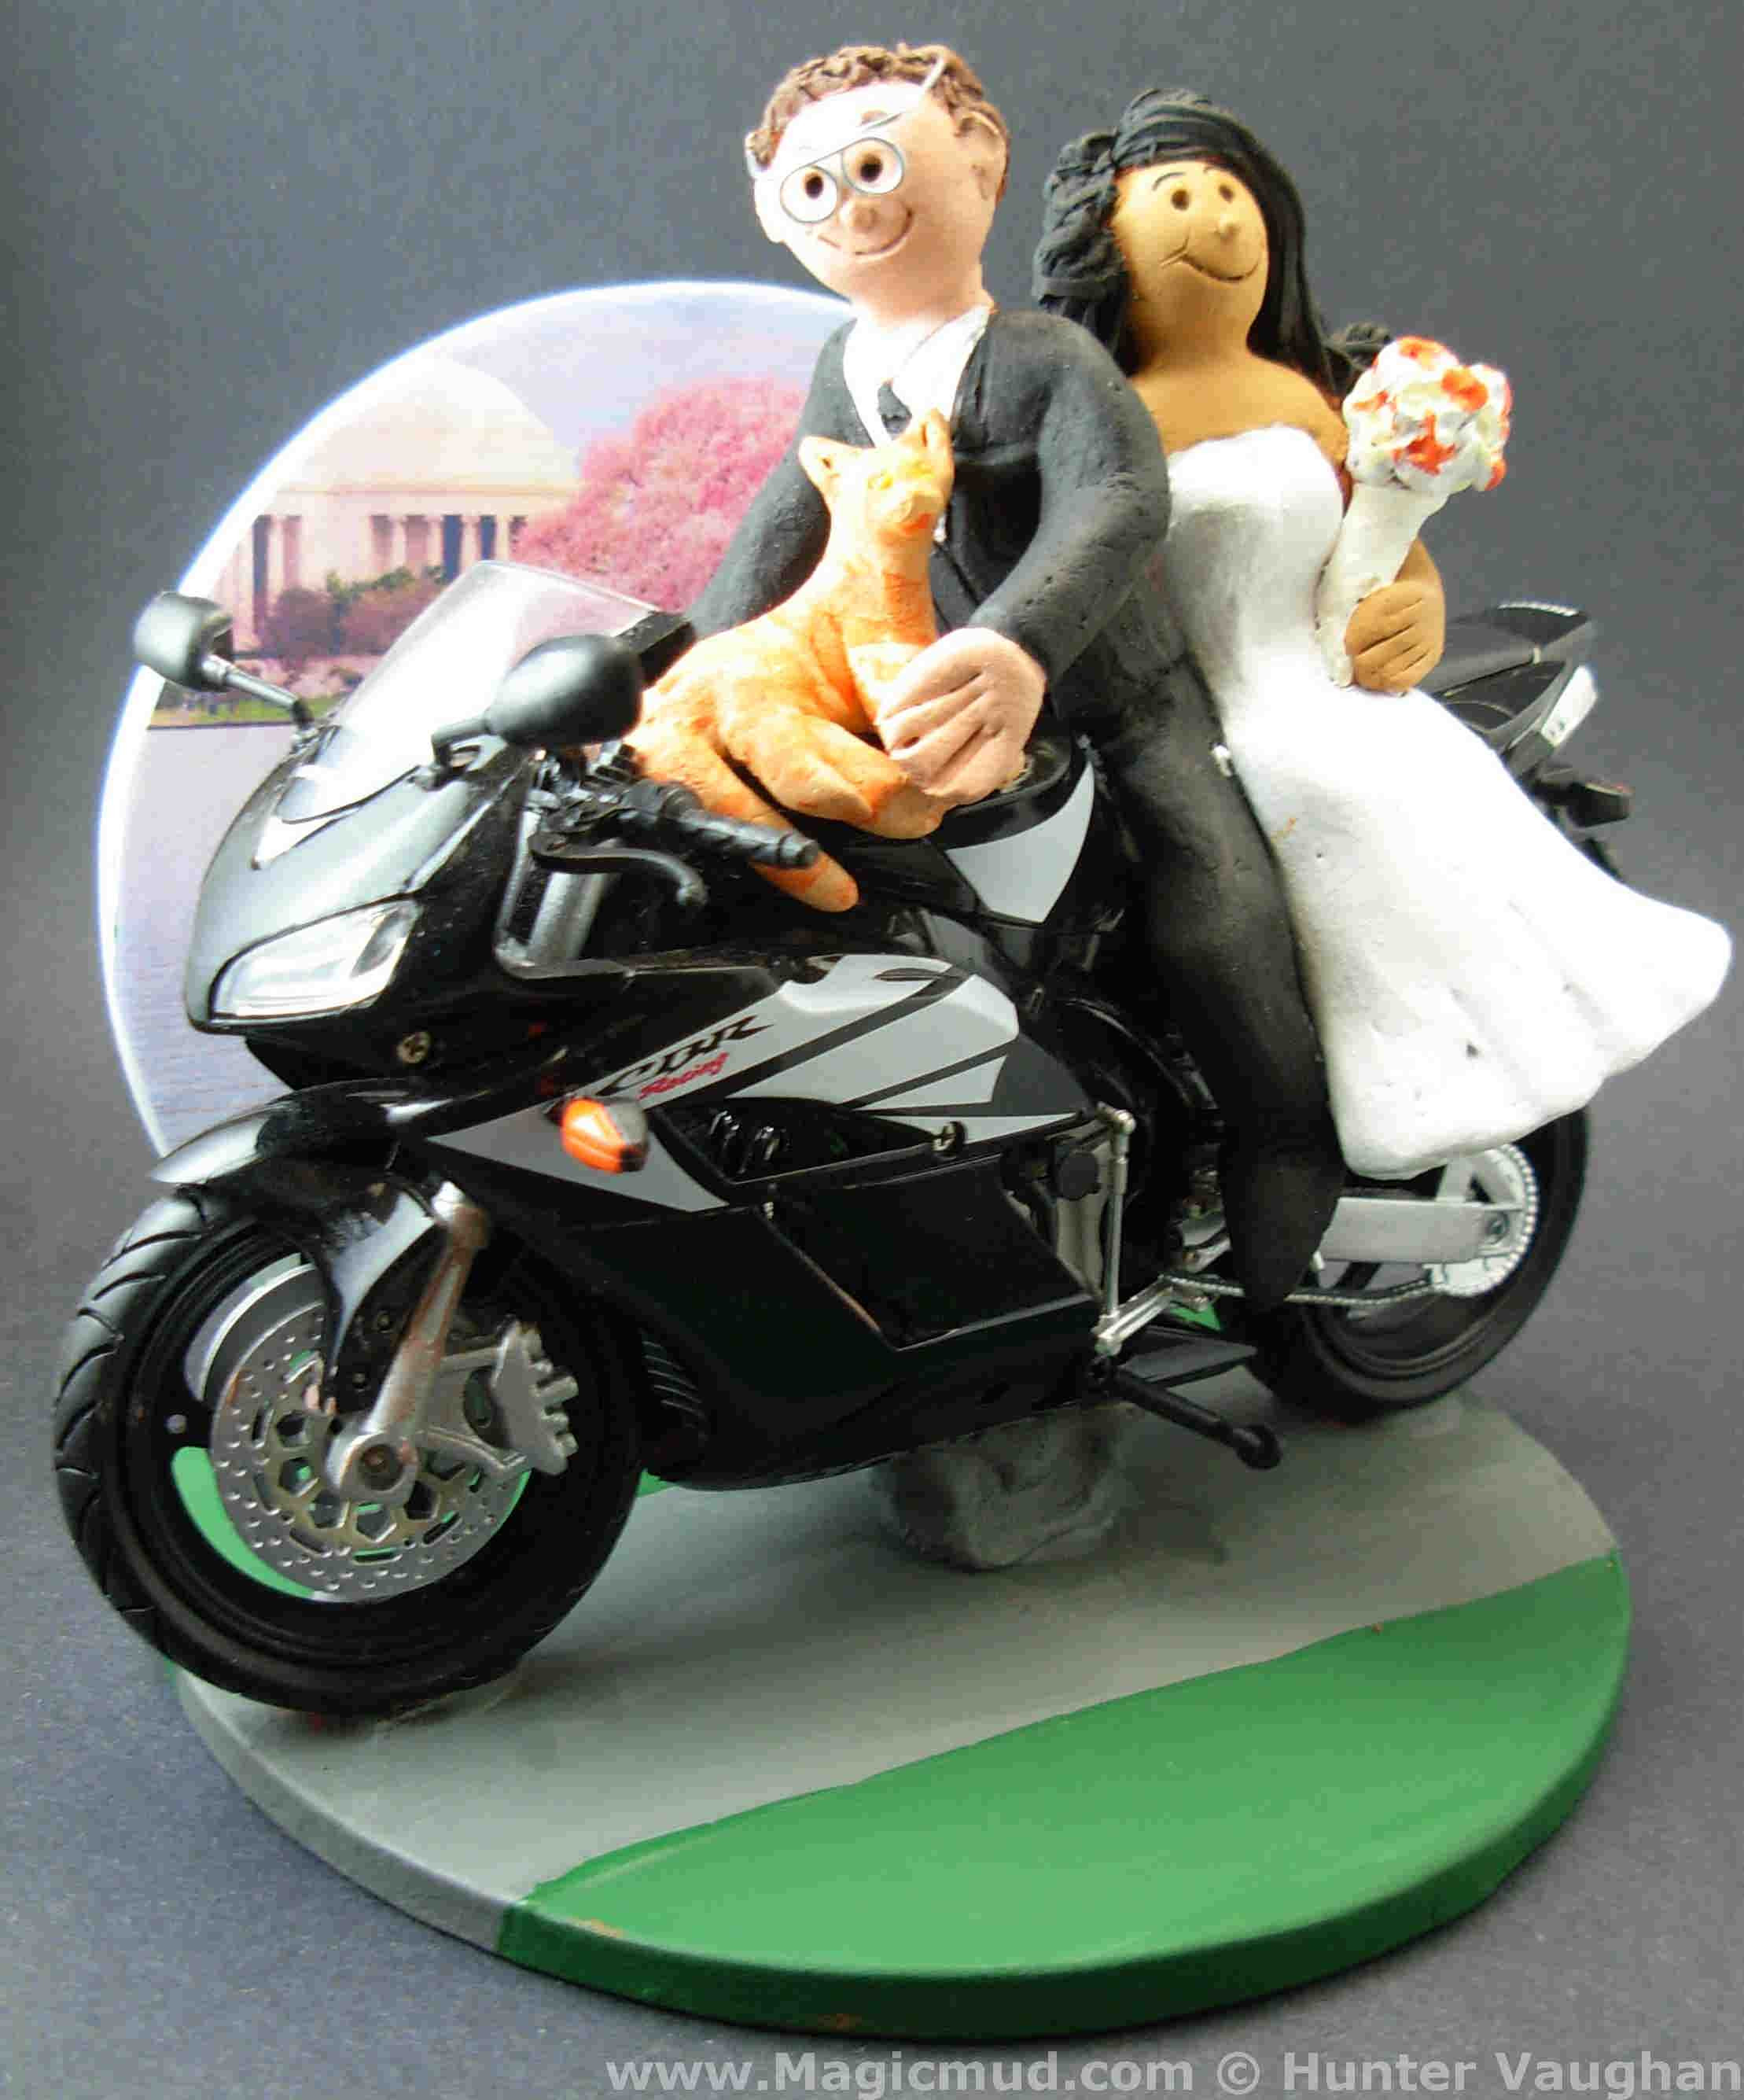 Motorcycle Cake Toppers For Wedding Cakes
 wedding cake toppers Dirt Bike Wedding Cake Toppers